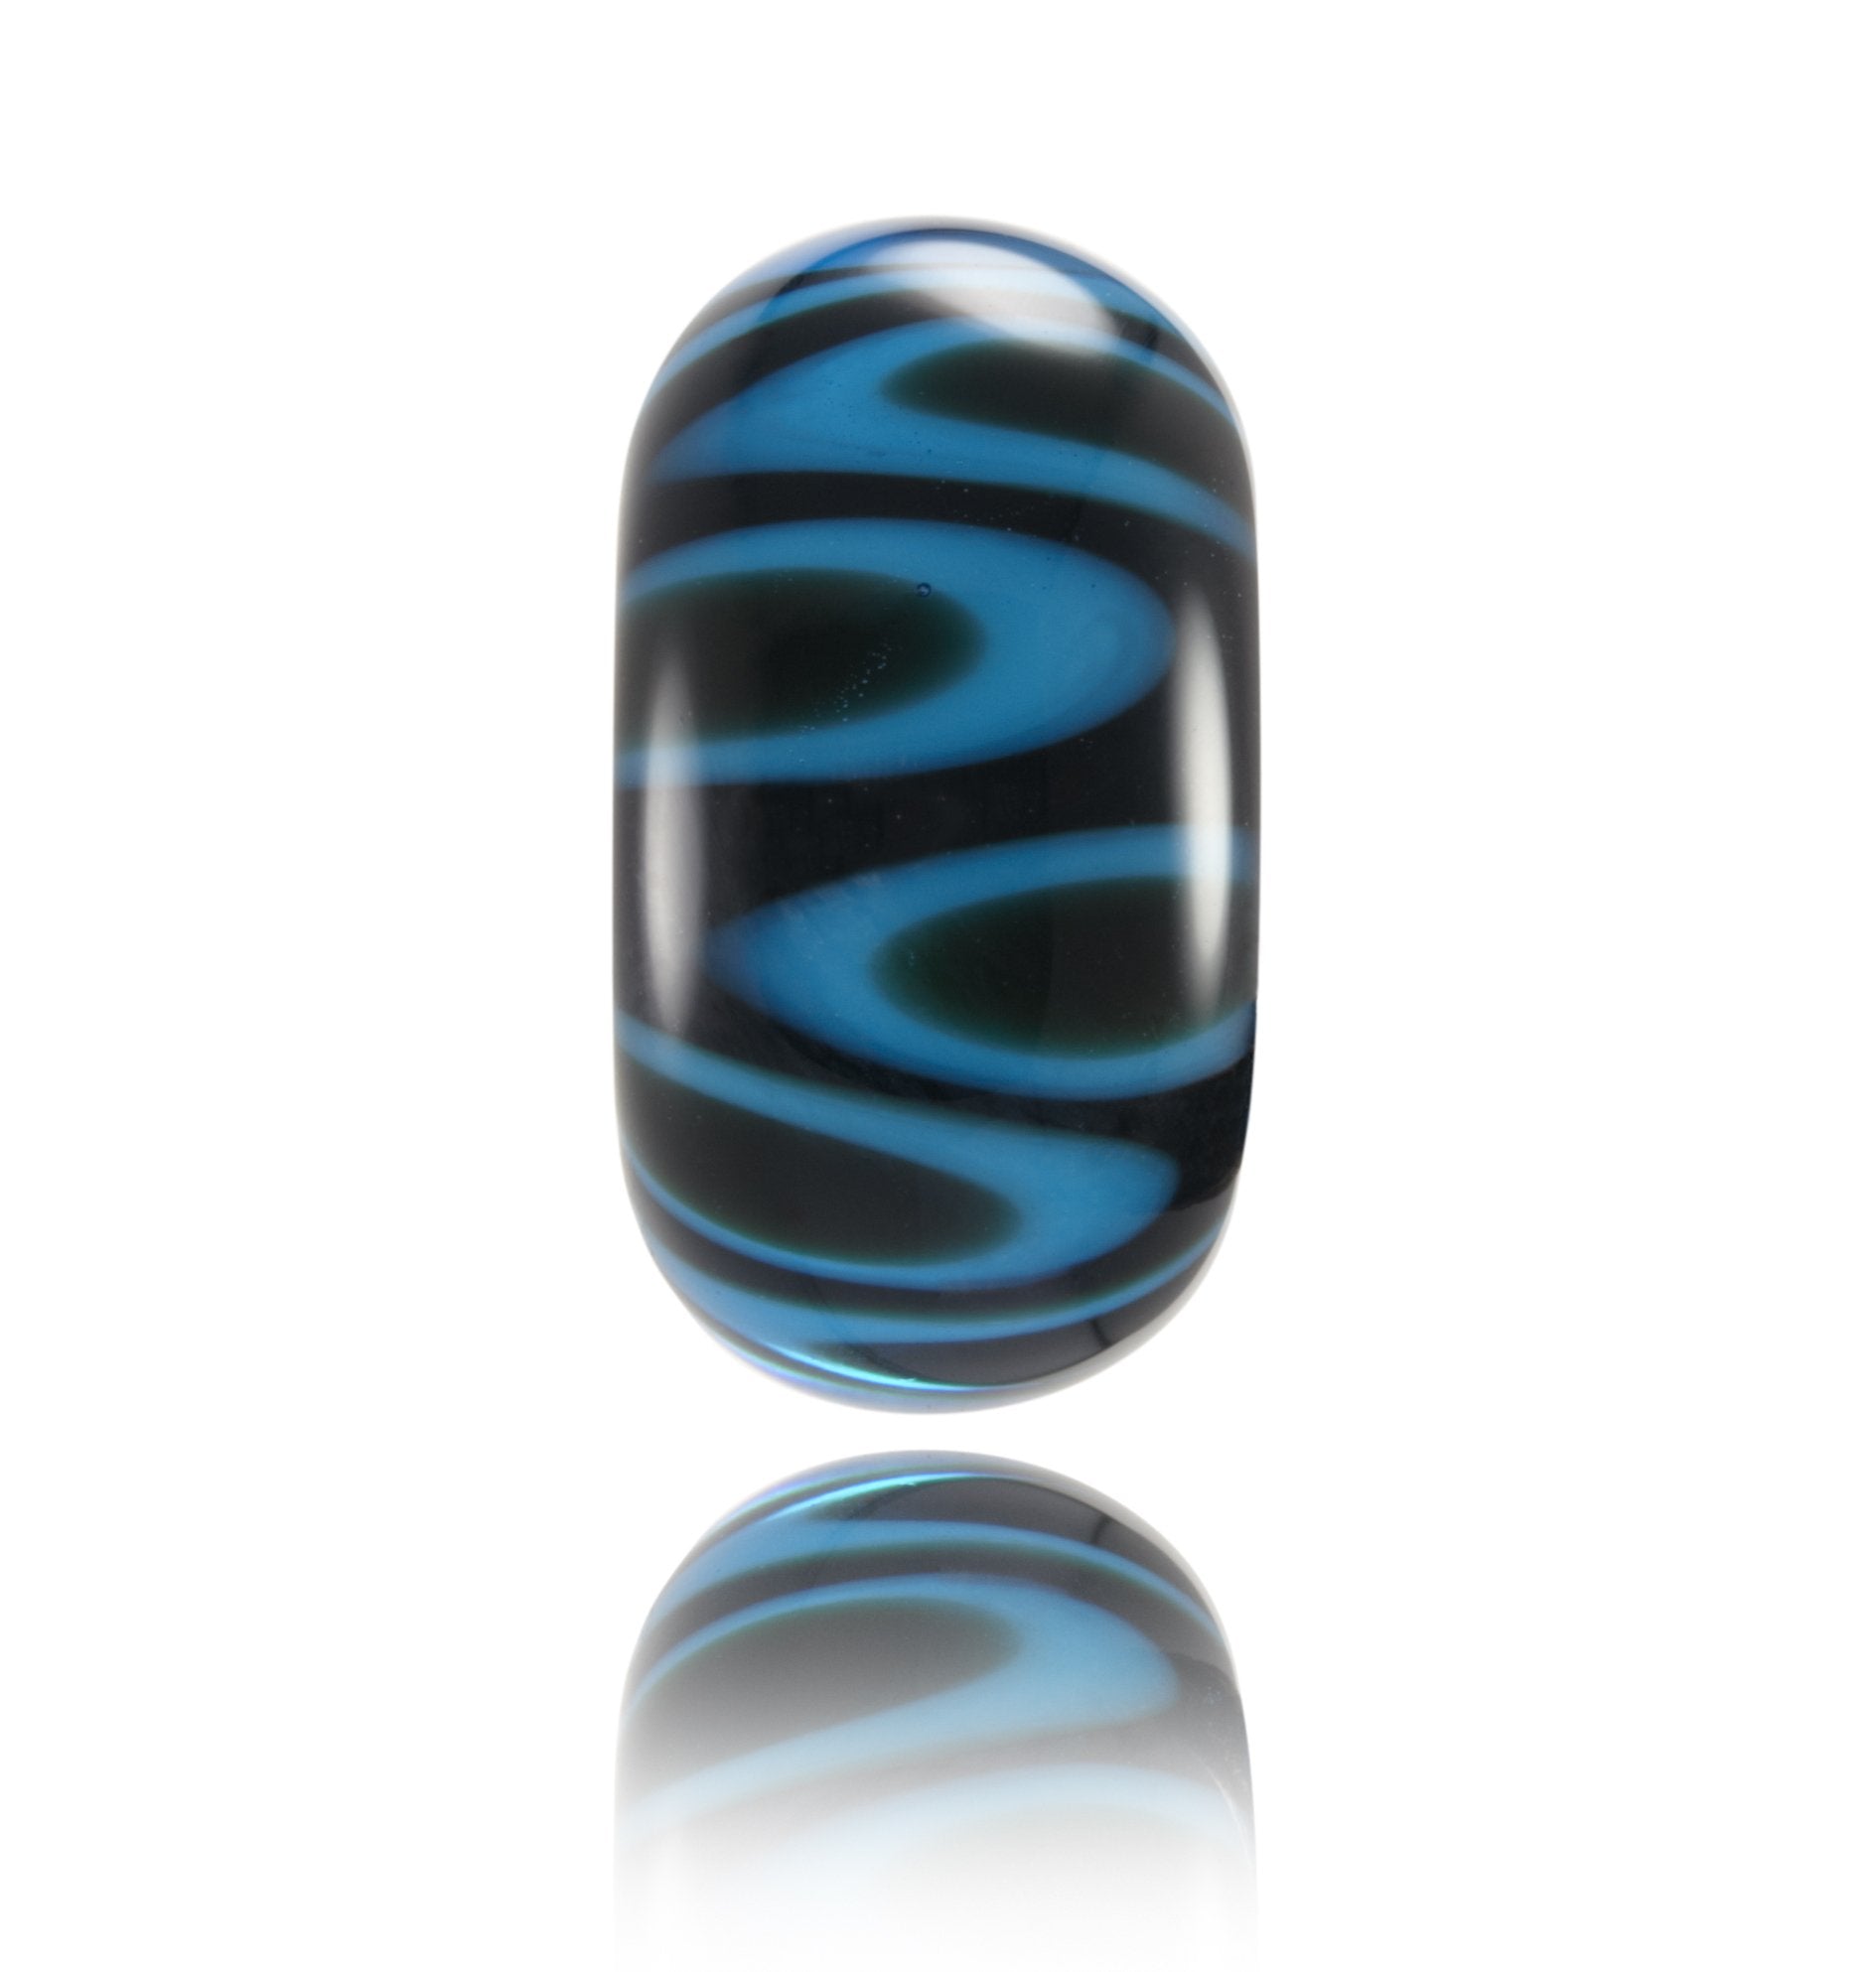 Deep dark blue glass bead with small islands beneath the surface, inspired by the island of Bali in Indonesia.